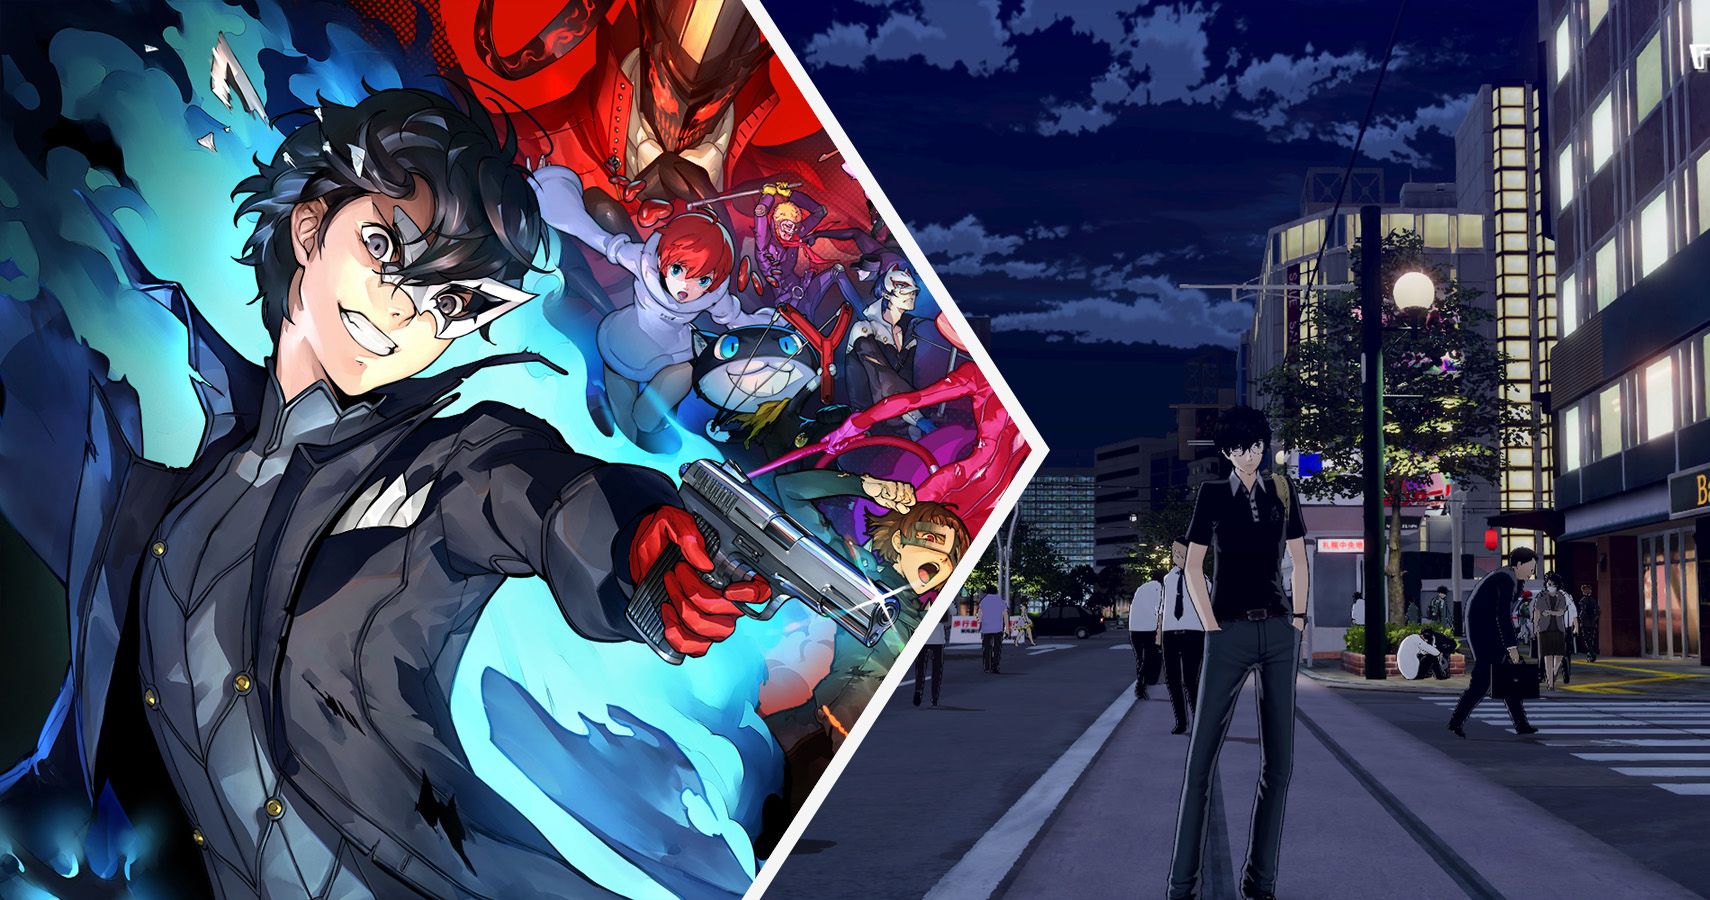 Persona 5 Strikers searching for rumors in Sapporo collage